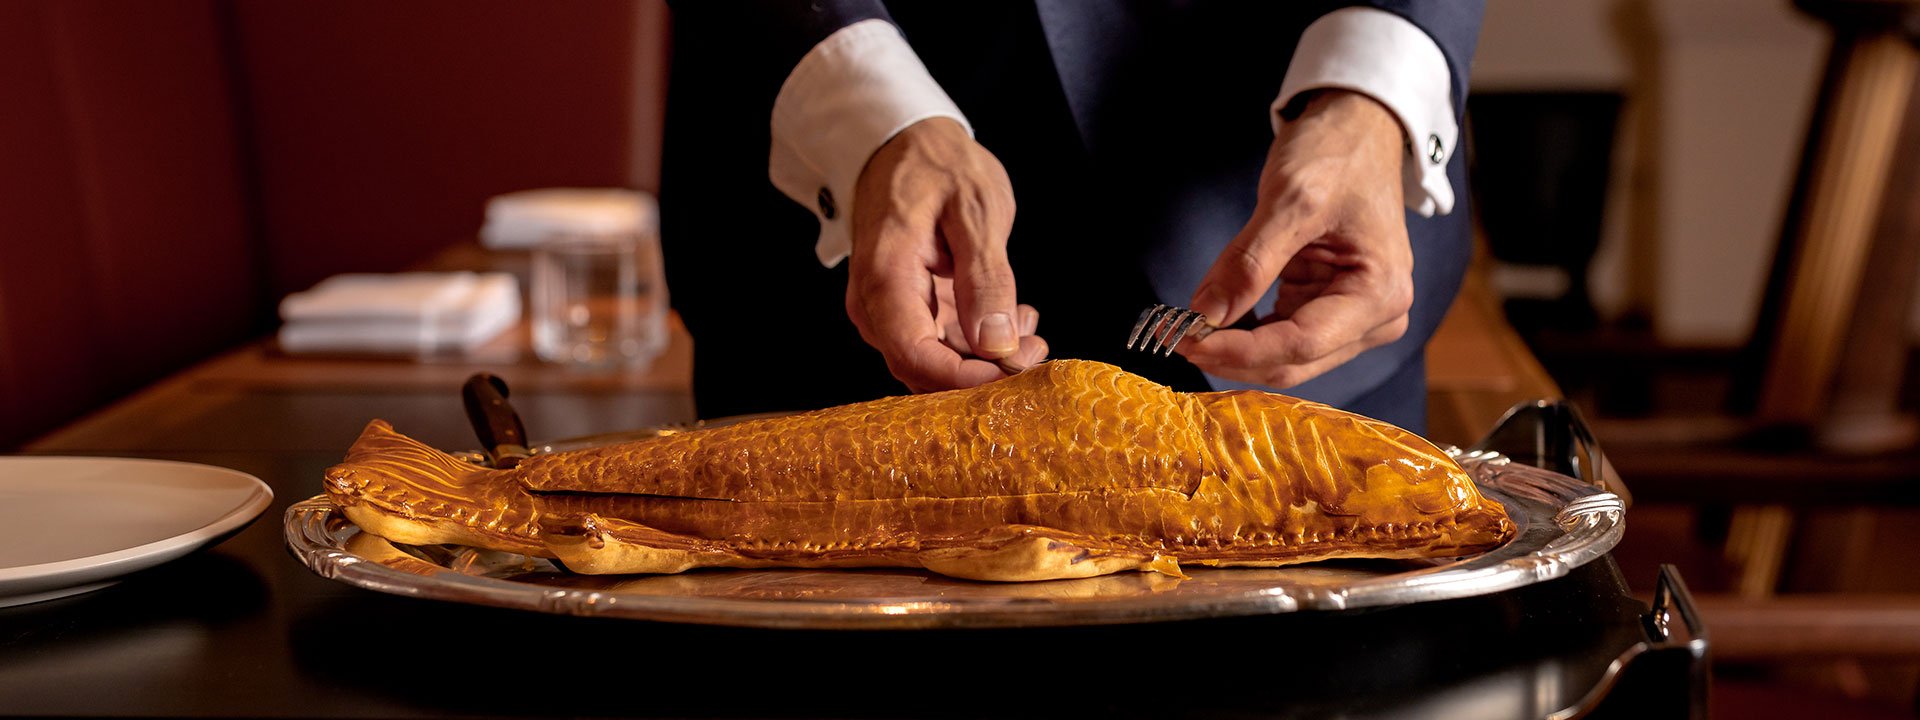 Presentation of whole wild sea bass en croute is shaped and decorated to look like the fish at The Connaught Grill.